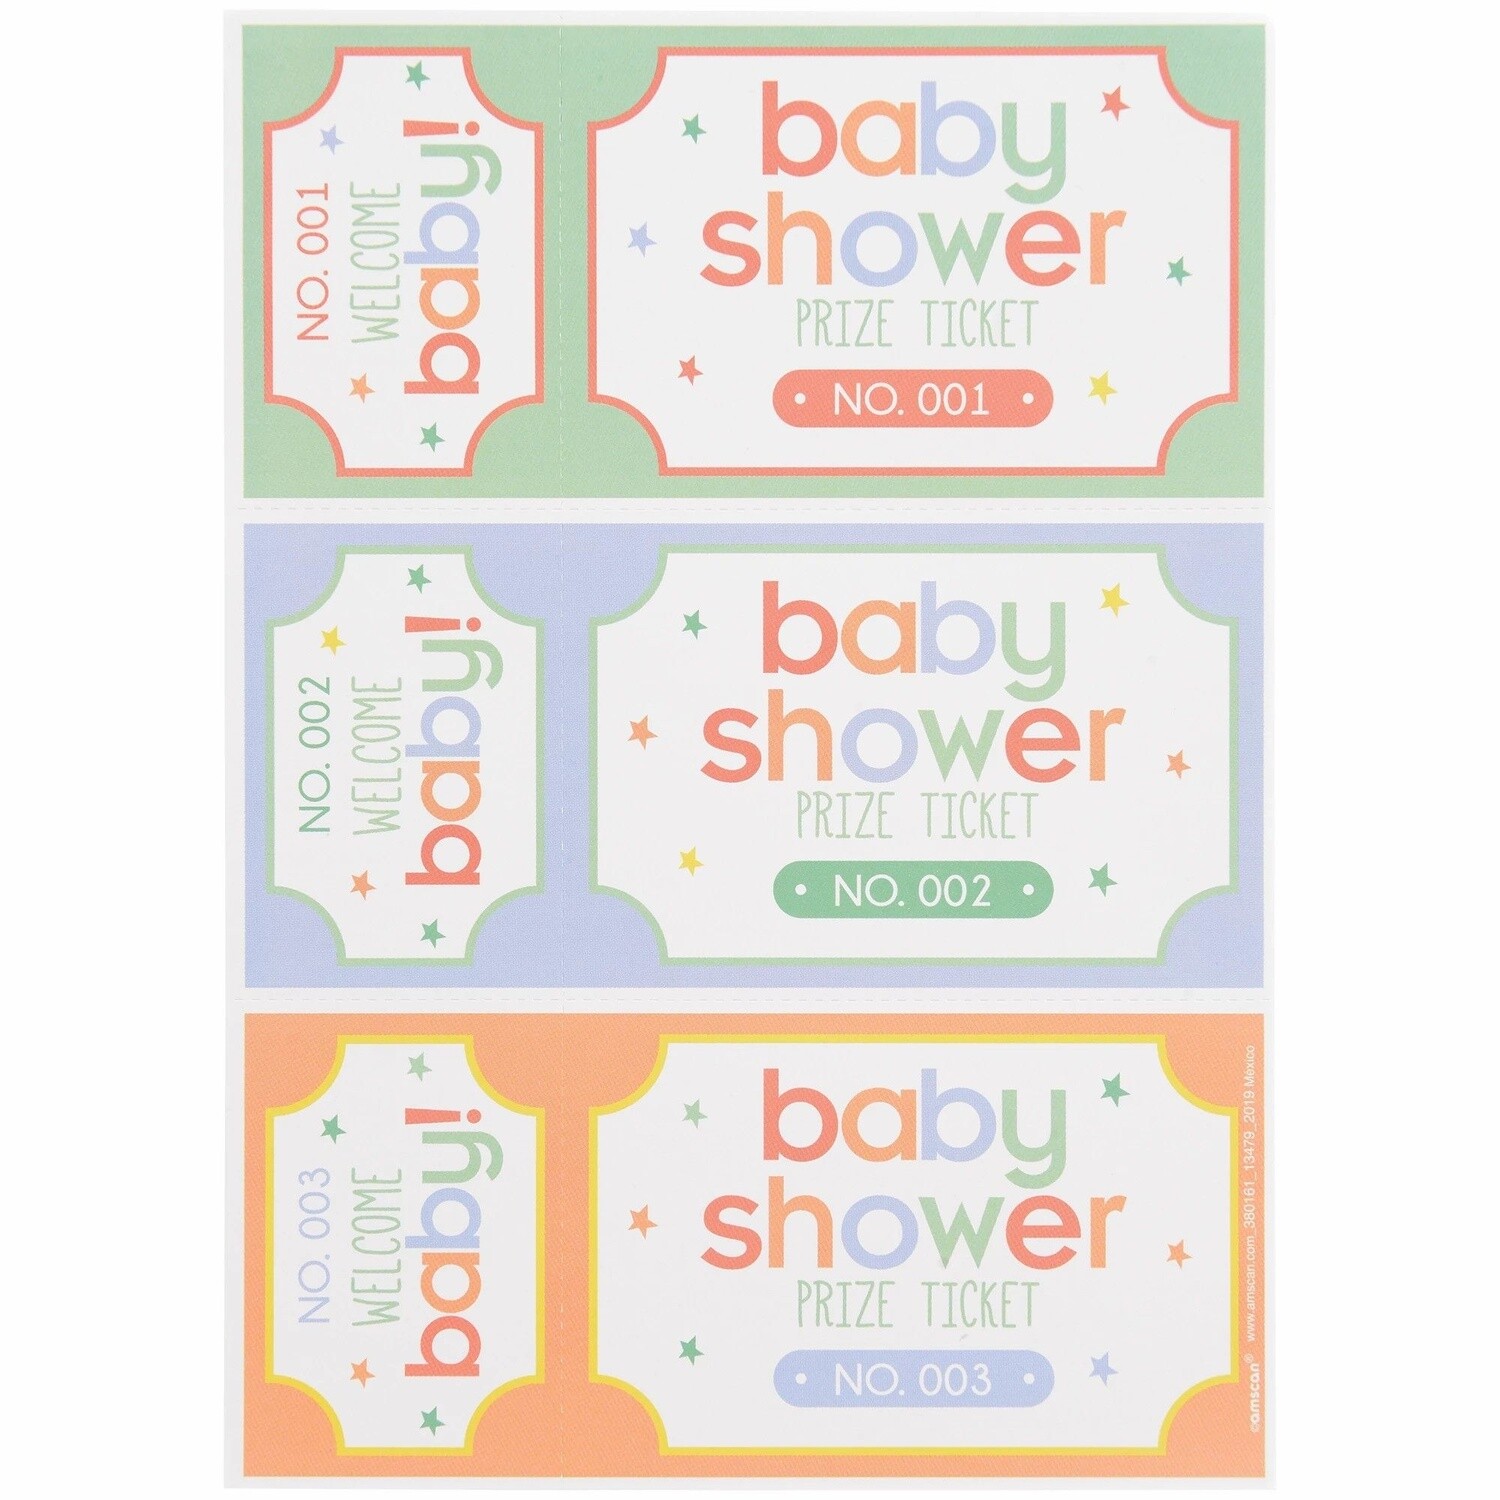 Baby Shower - Prize Tickets - 16 Sheets